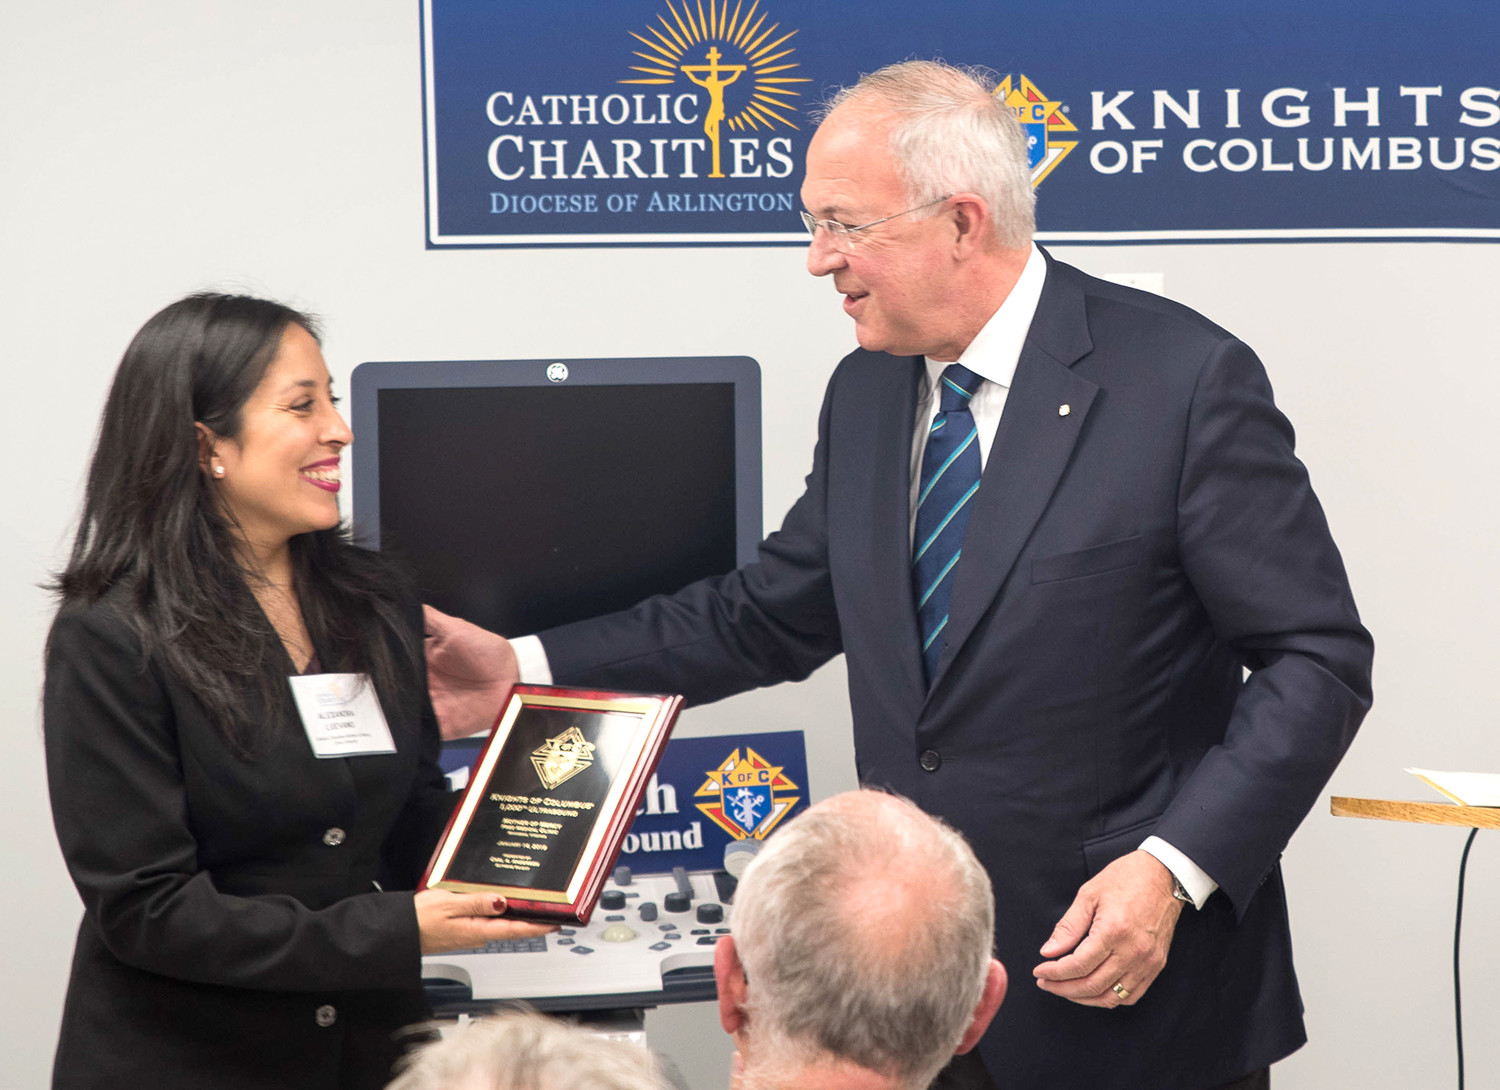 Alexandra Luevano, director of the Mother of Mercy Free Clinic in Manassas, Virginia, receives a plaque Jan. 14 from Carl Anderson, CEO of the Knights of Columbus, during the blessing ceremony of a new ultrasound machine.